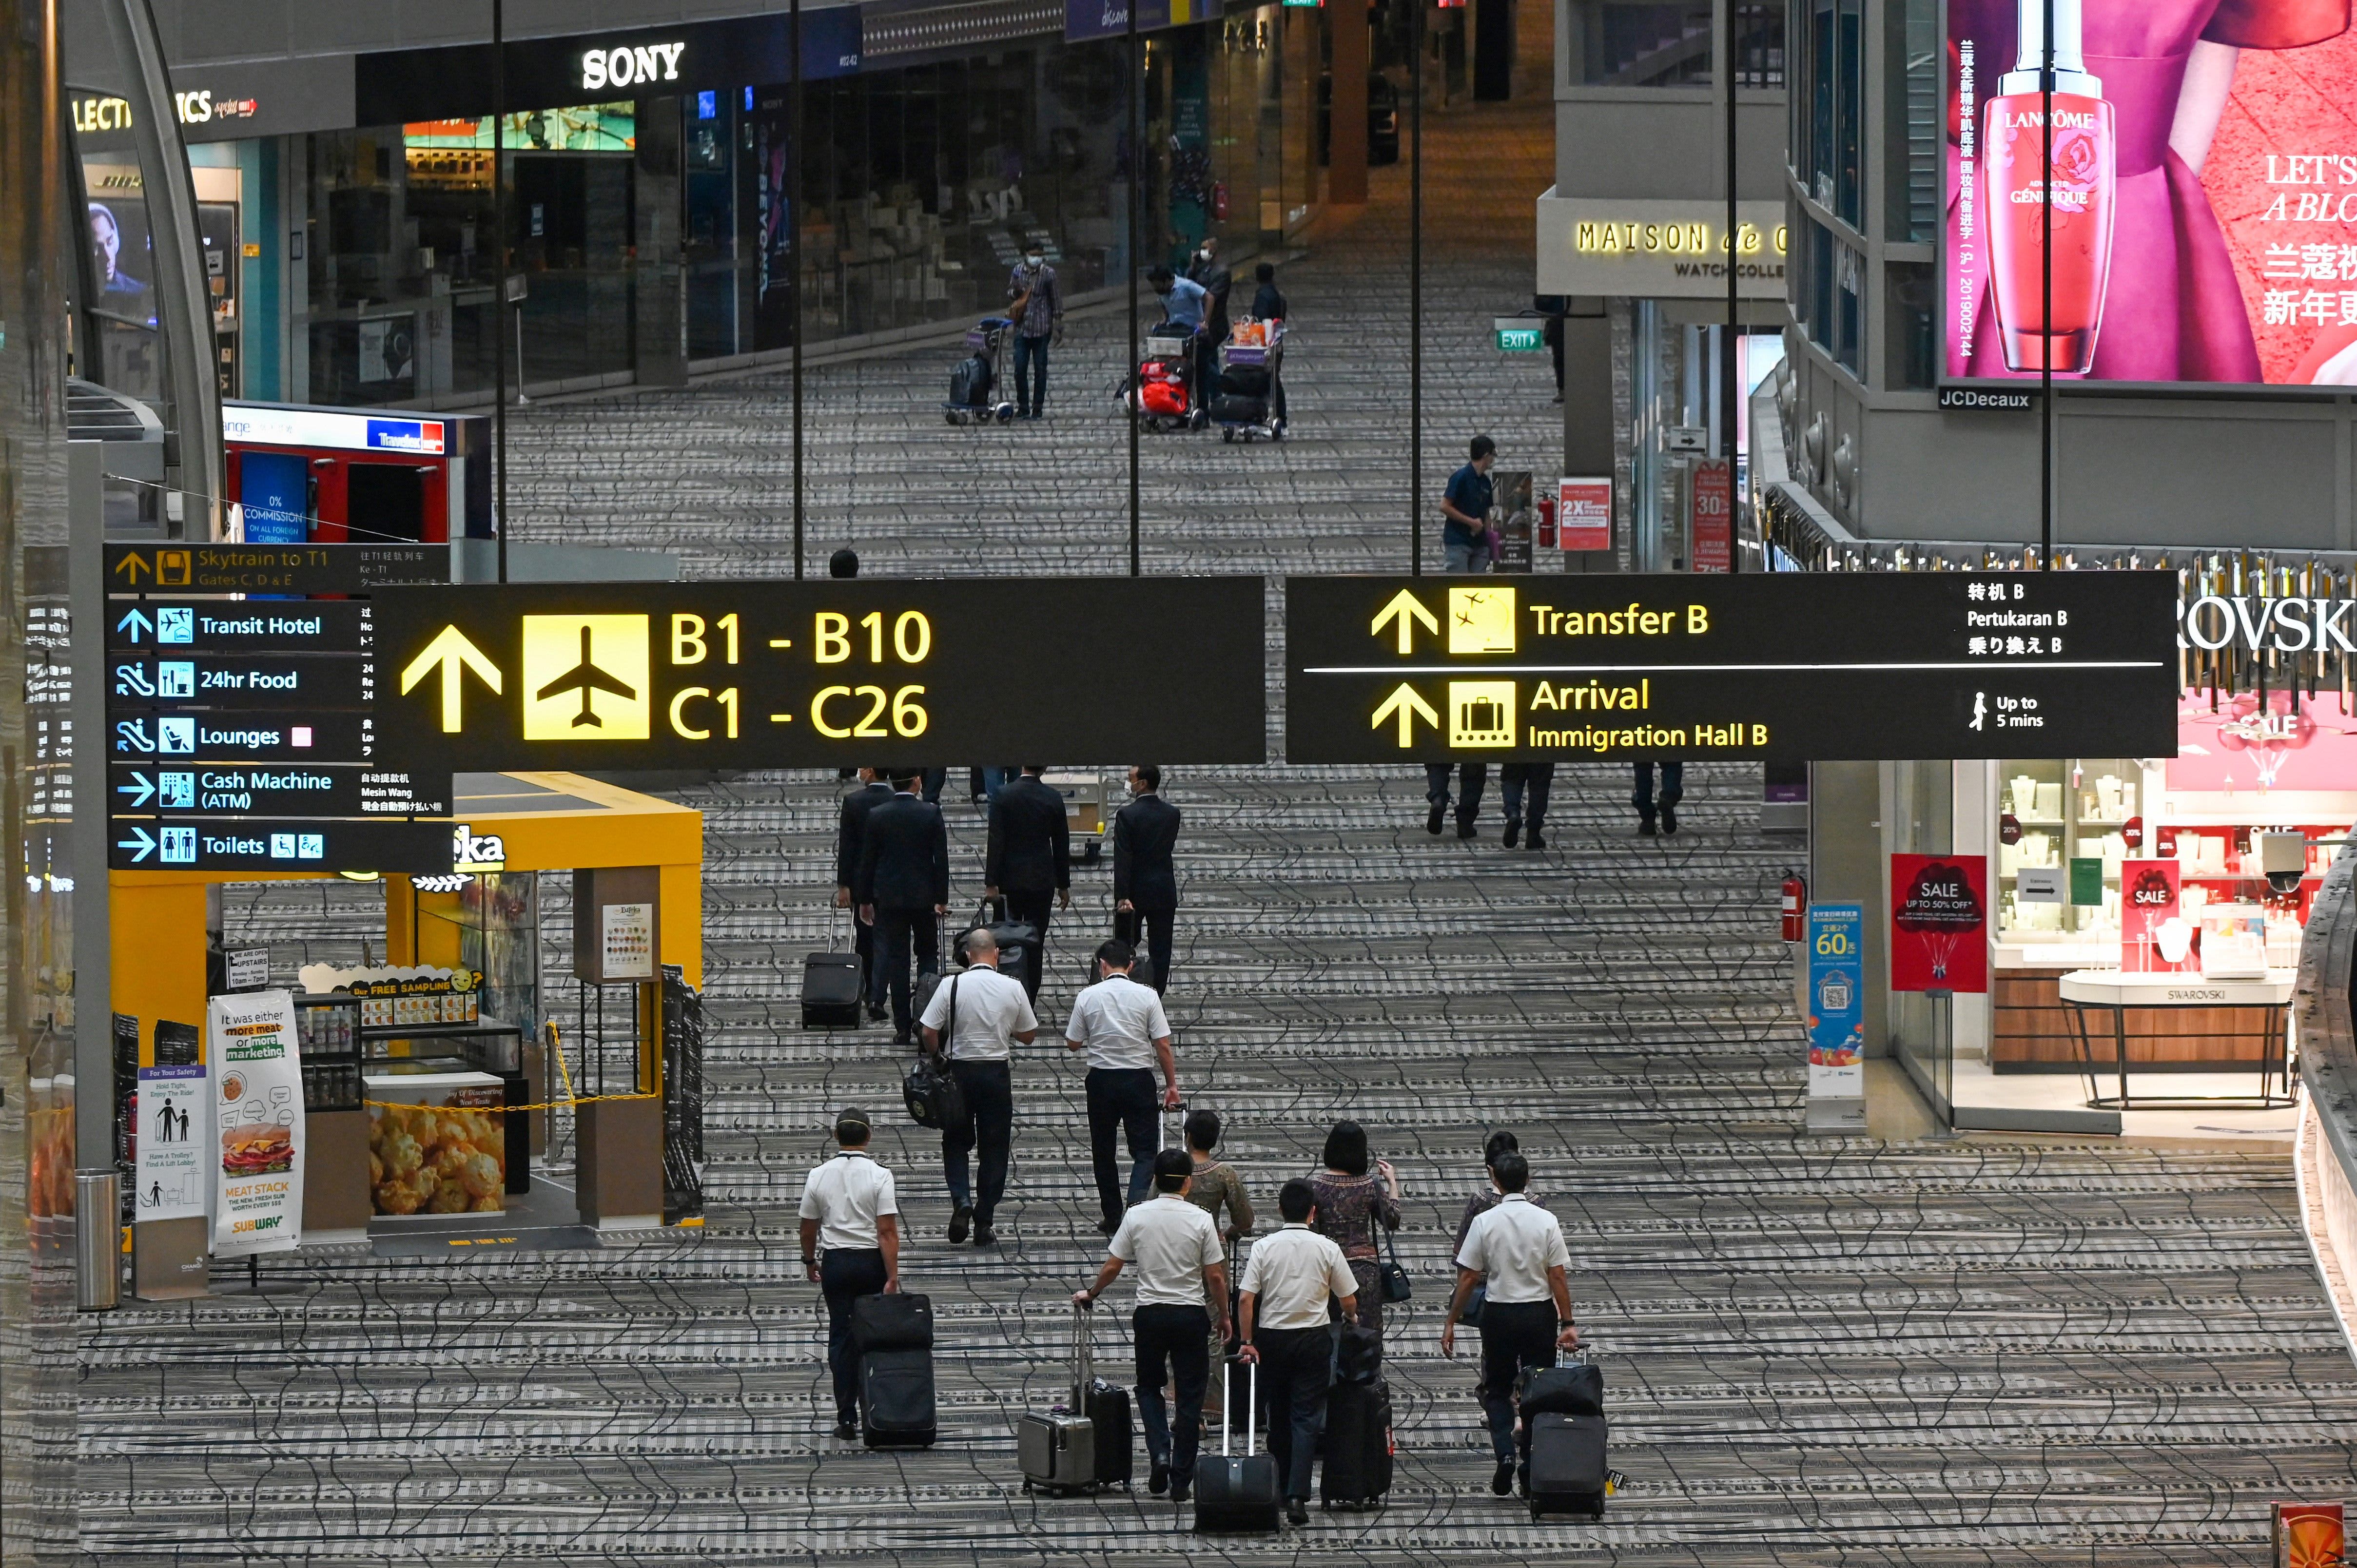 Singapore and Hong Kong to postpone travel bubble again as Covid cases rise